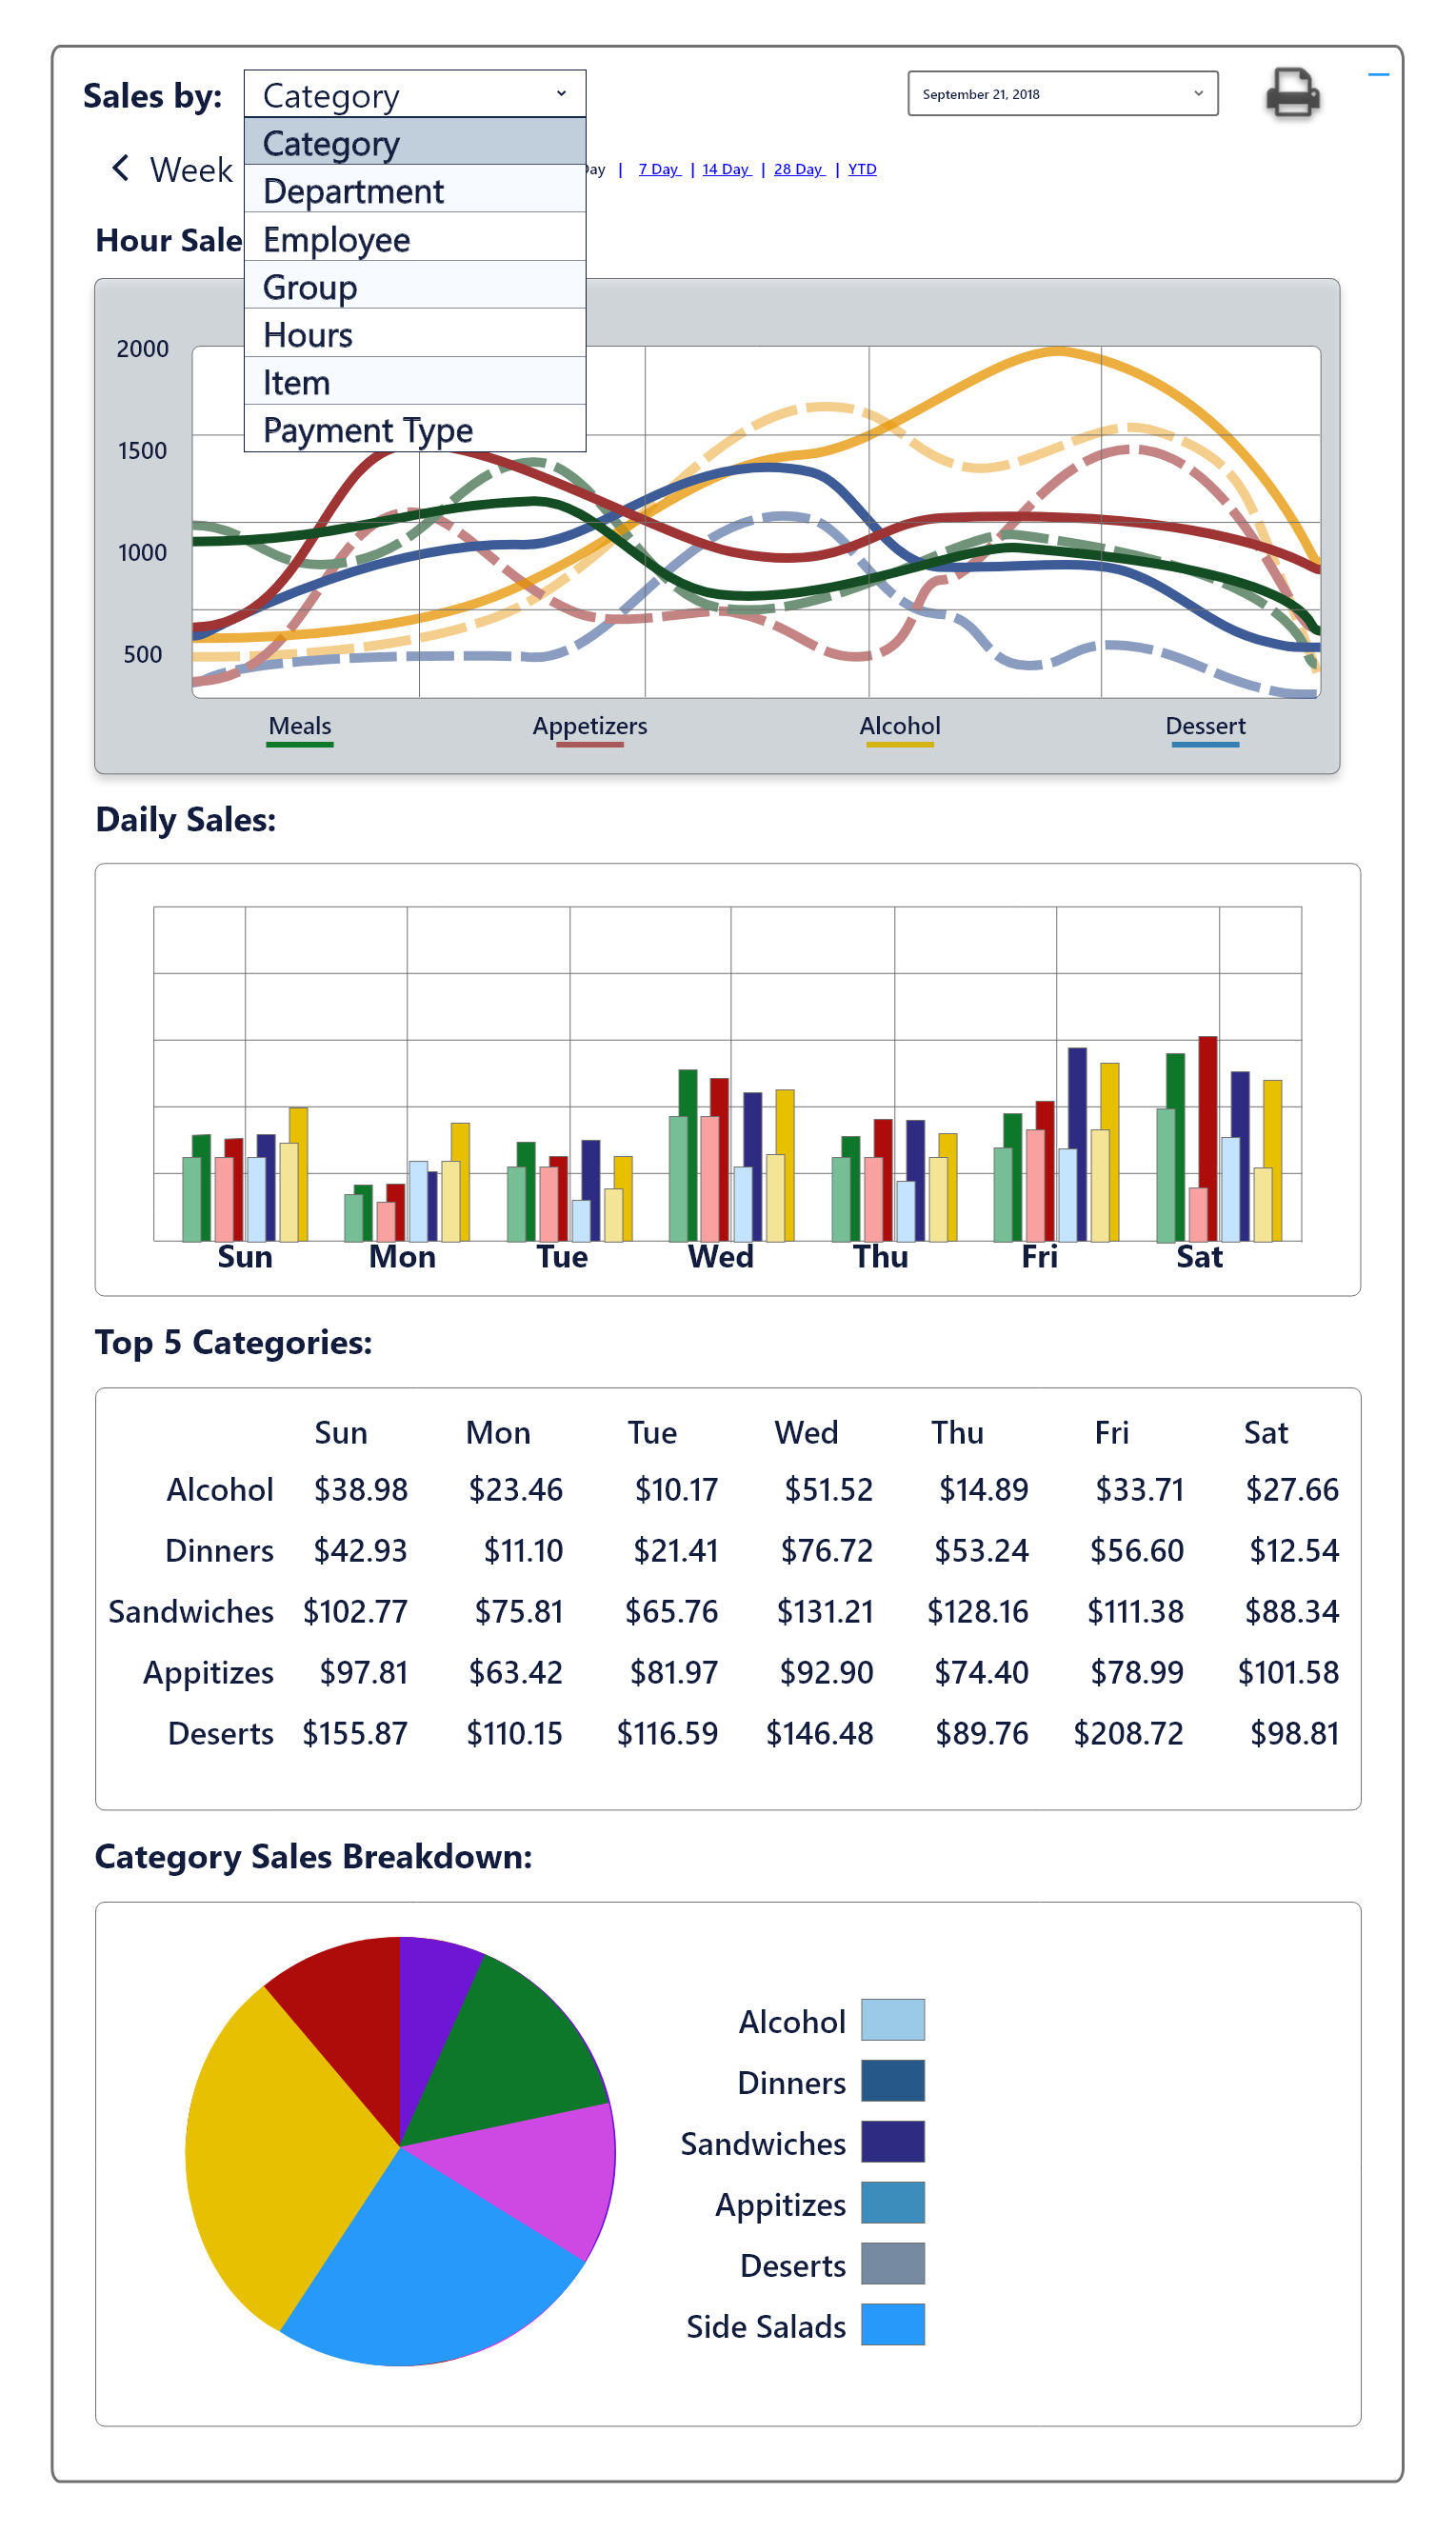 PointOS Software - Reports and analytics